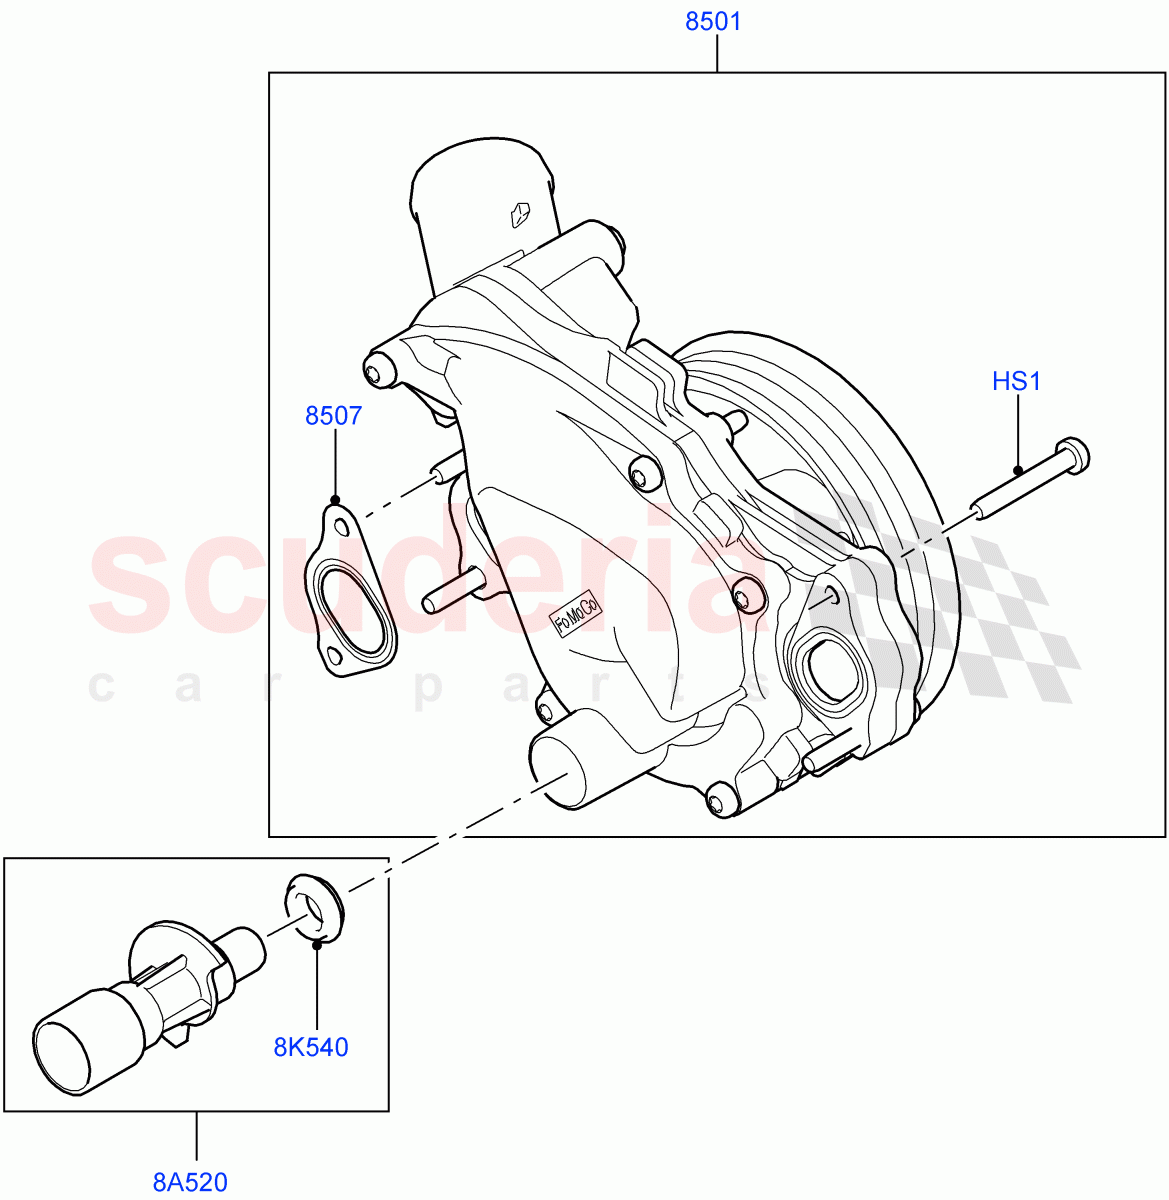 Water Pump(Main Unit, Solihull Plant Build)(3.0L DOHC GDI SC V6 PETROL)((V)FROMEA000001) of Land Rover Land Rover Range Rover (2012-2021) [3.0 DOHC GDI SC V6 Petrol]